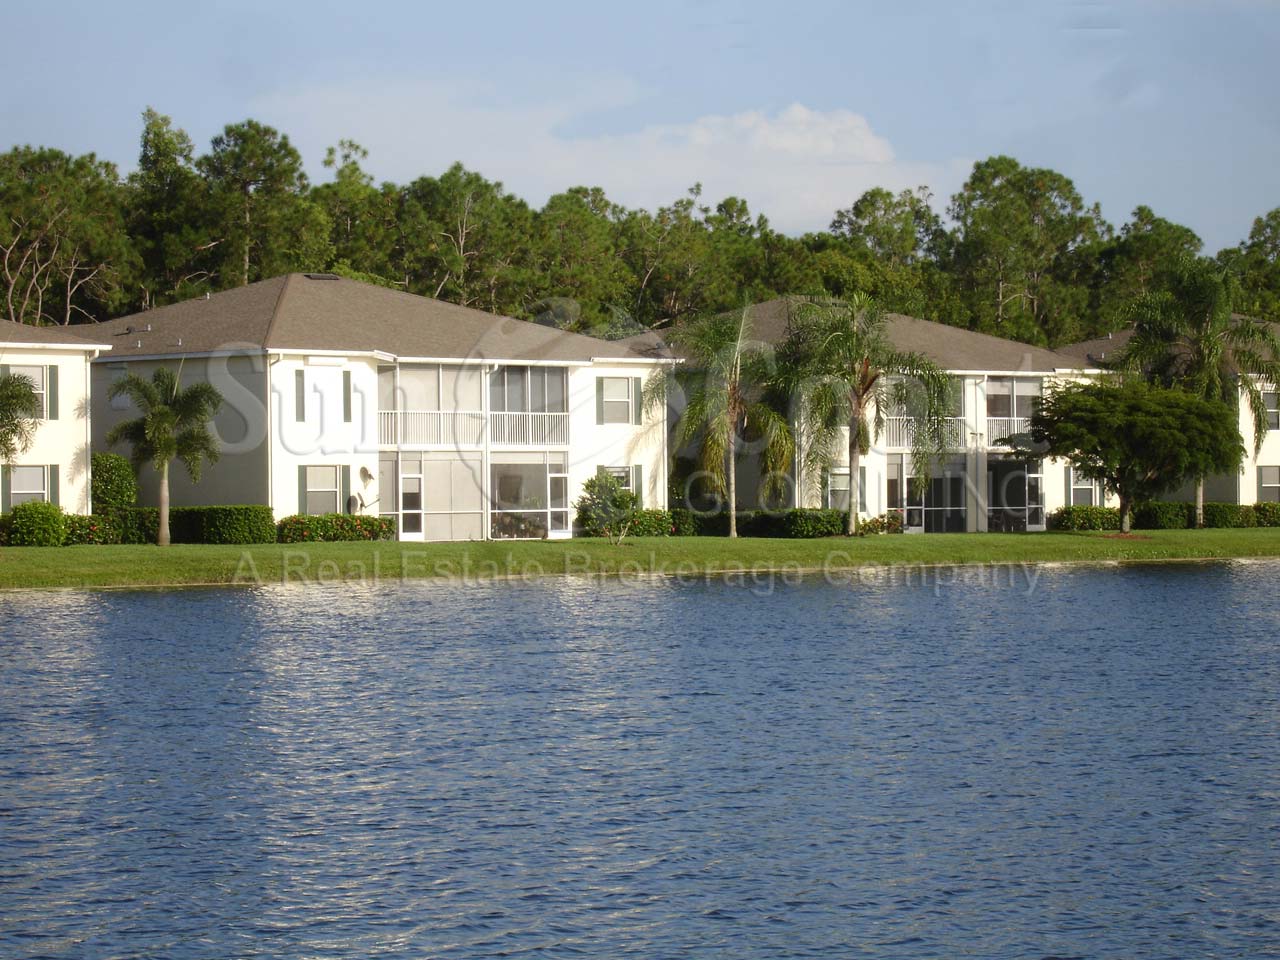 Crown Pointe Shores View of Water